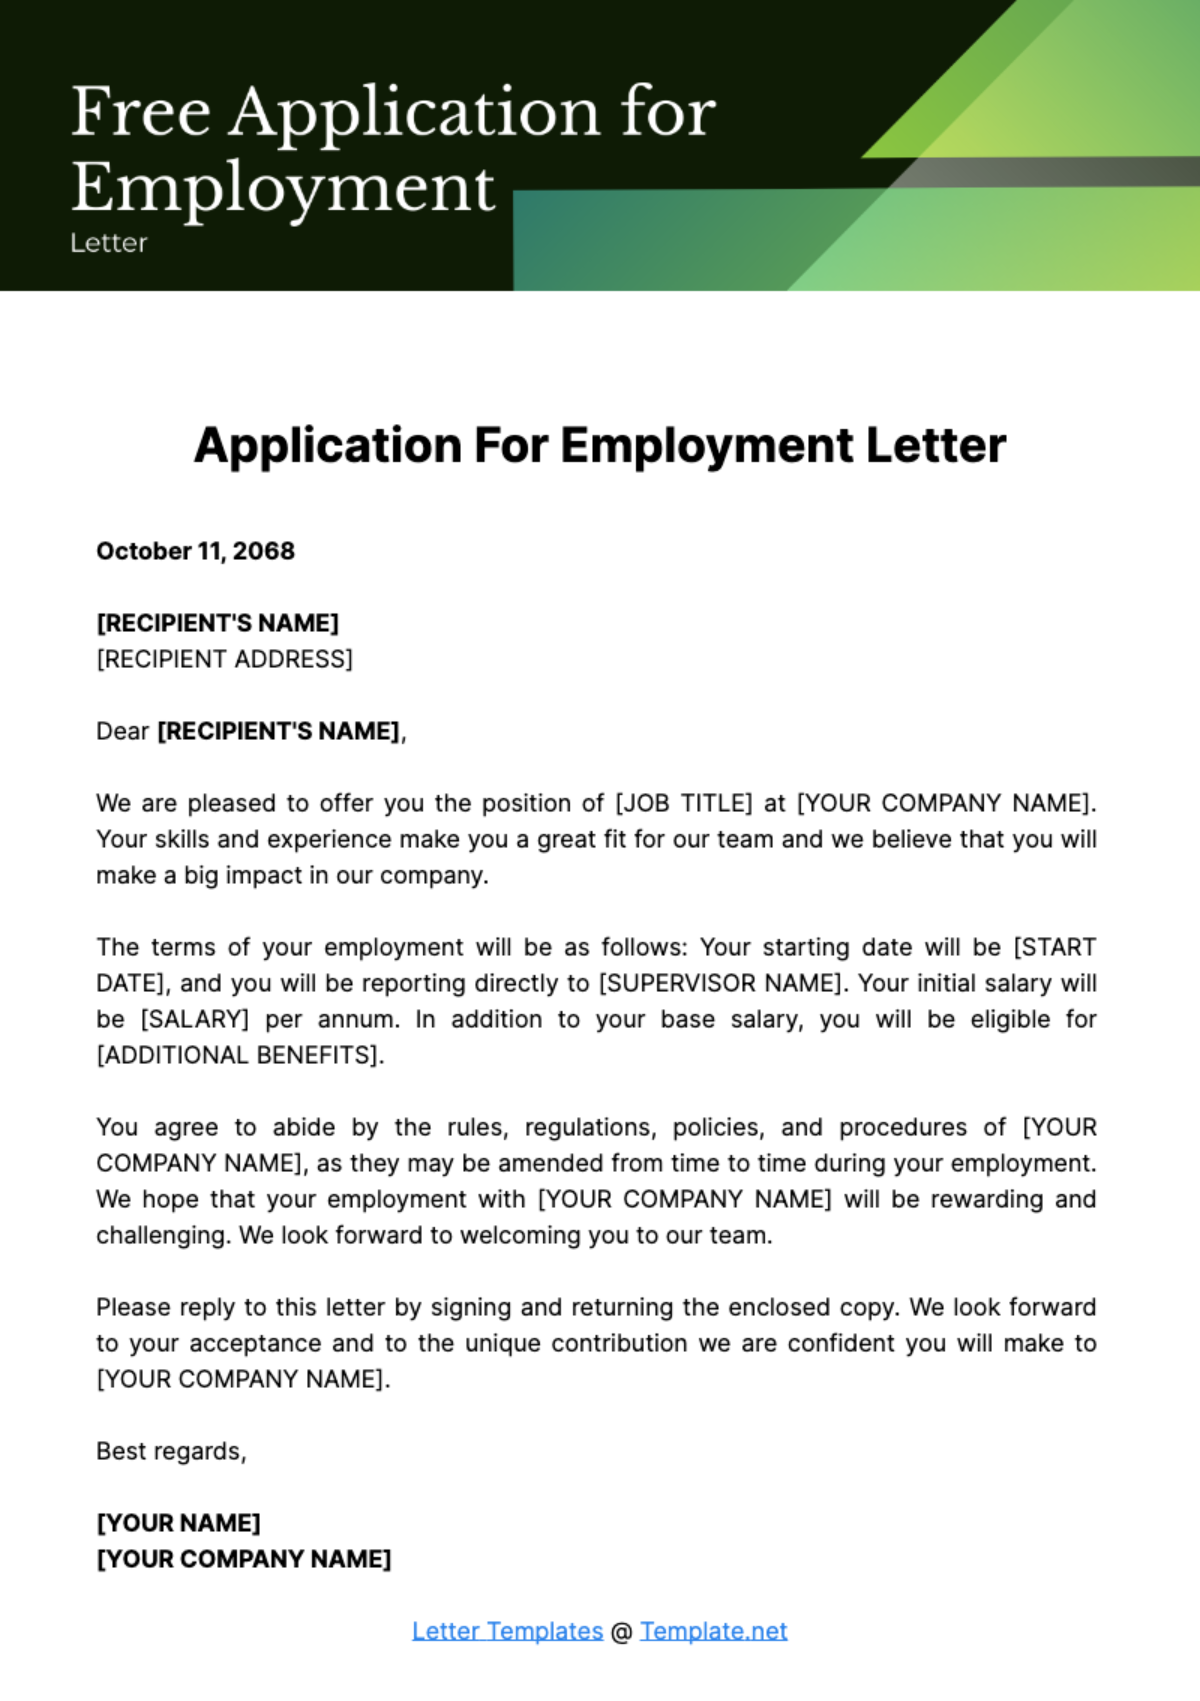 Application for Employment Letter Template